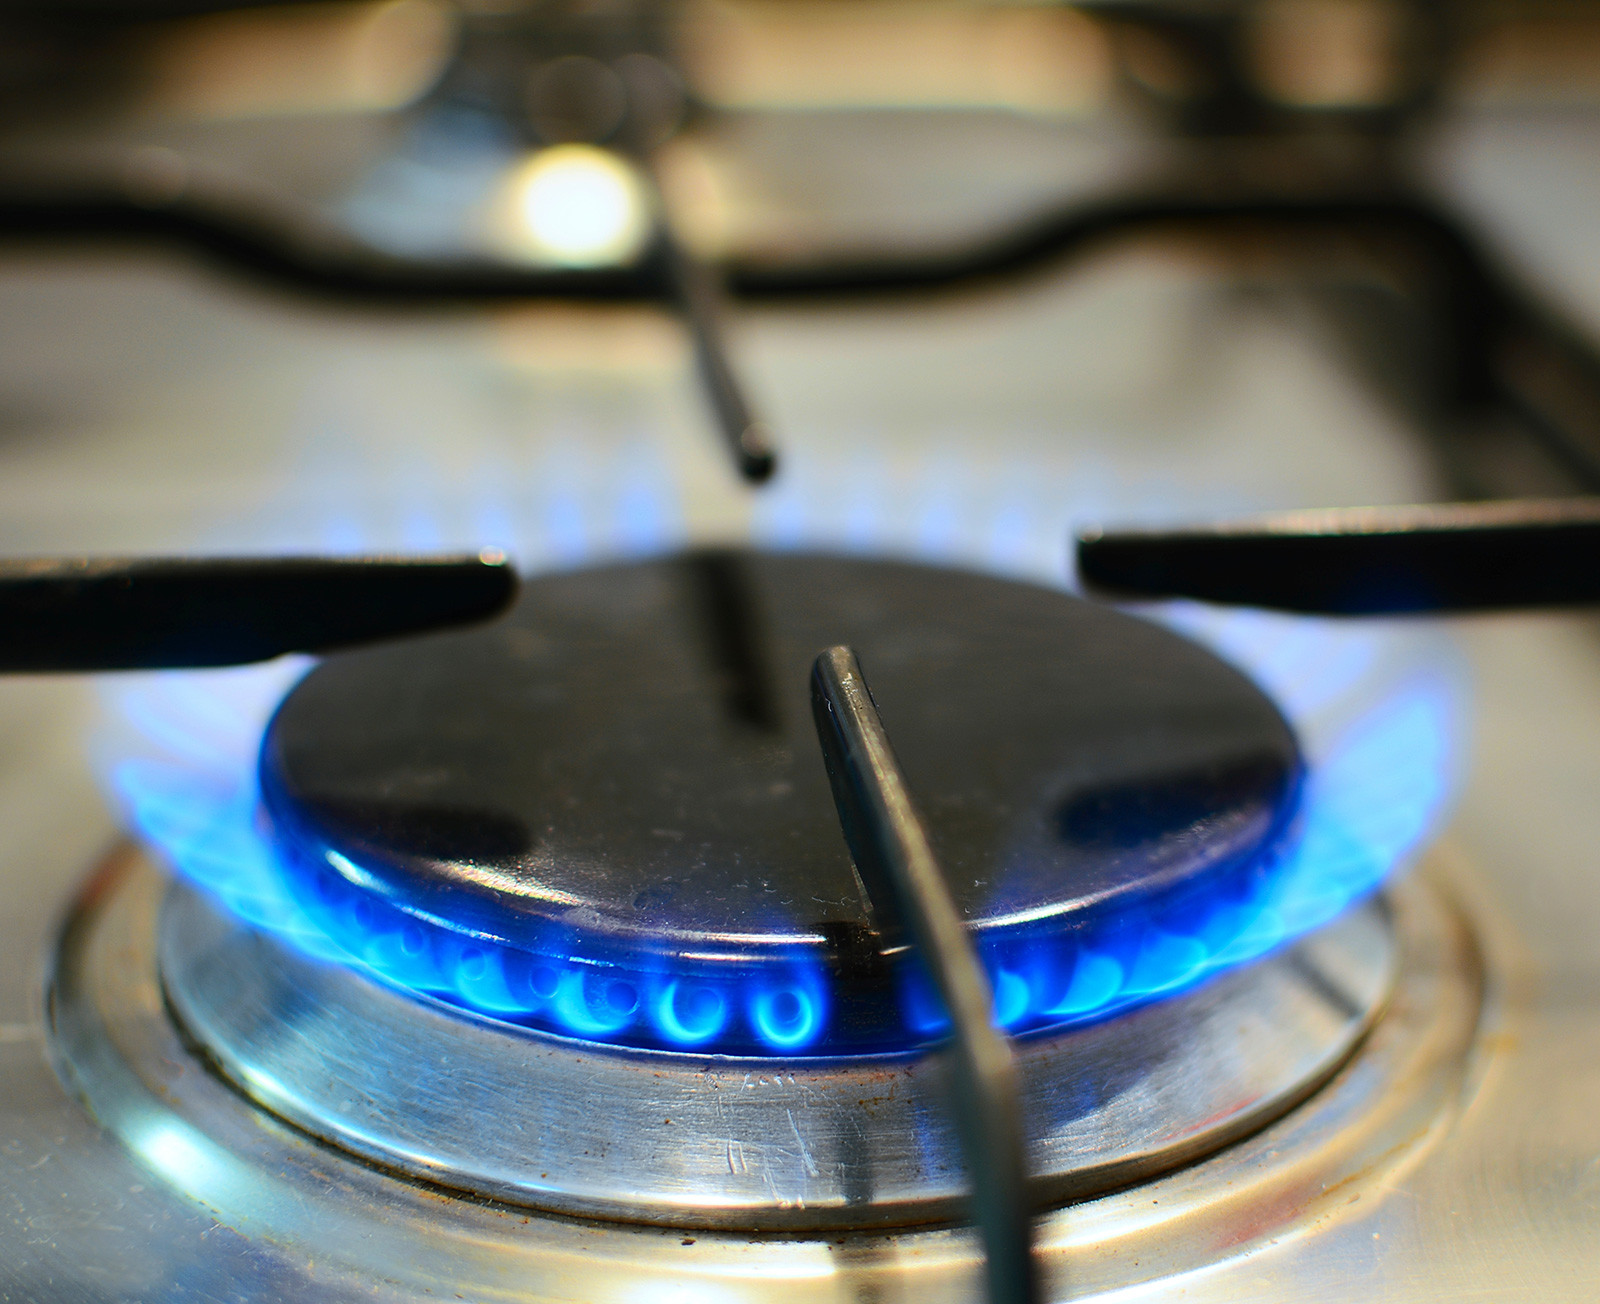 A gas stove burner turned on, creating a blue flame.